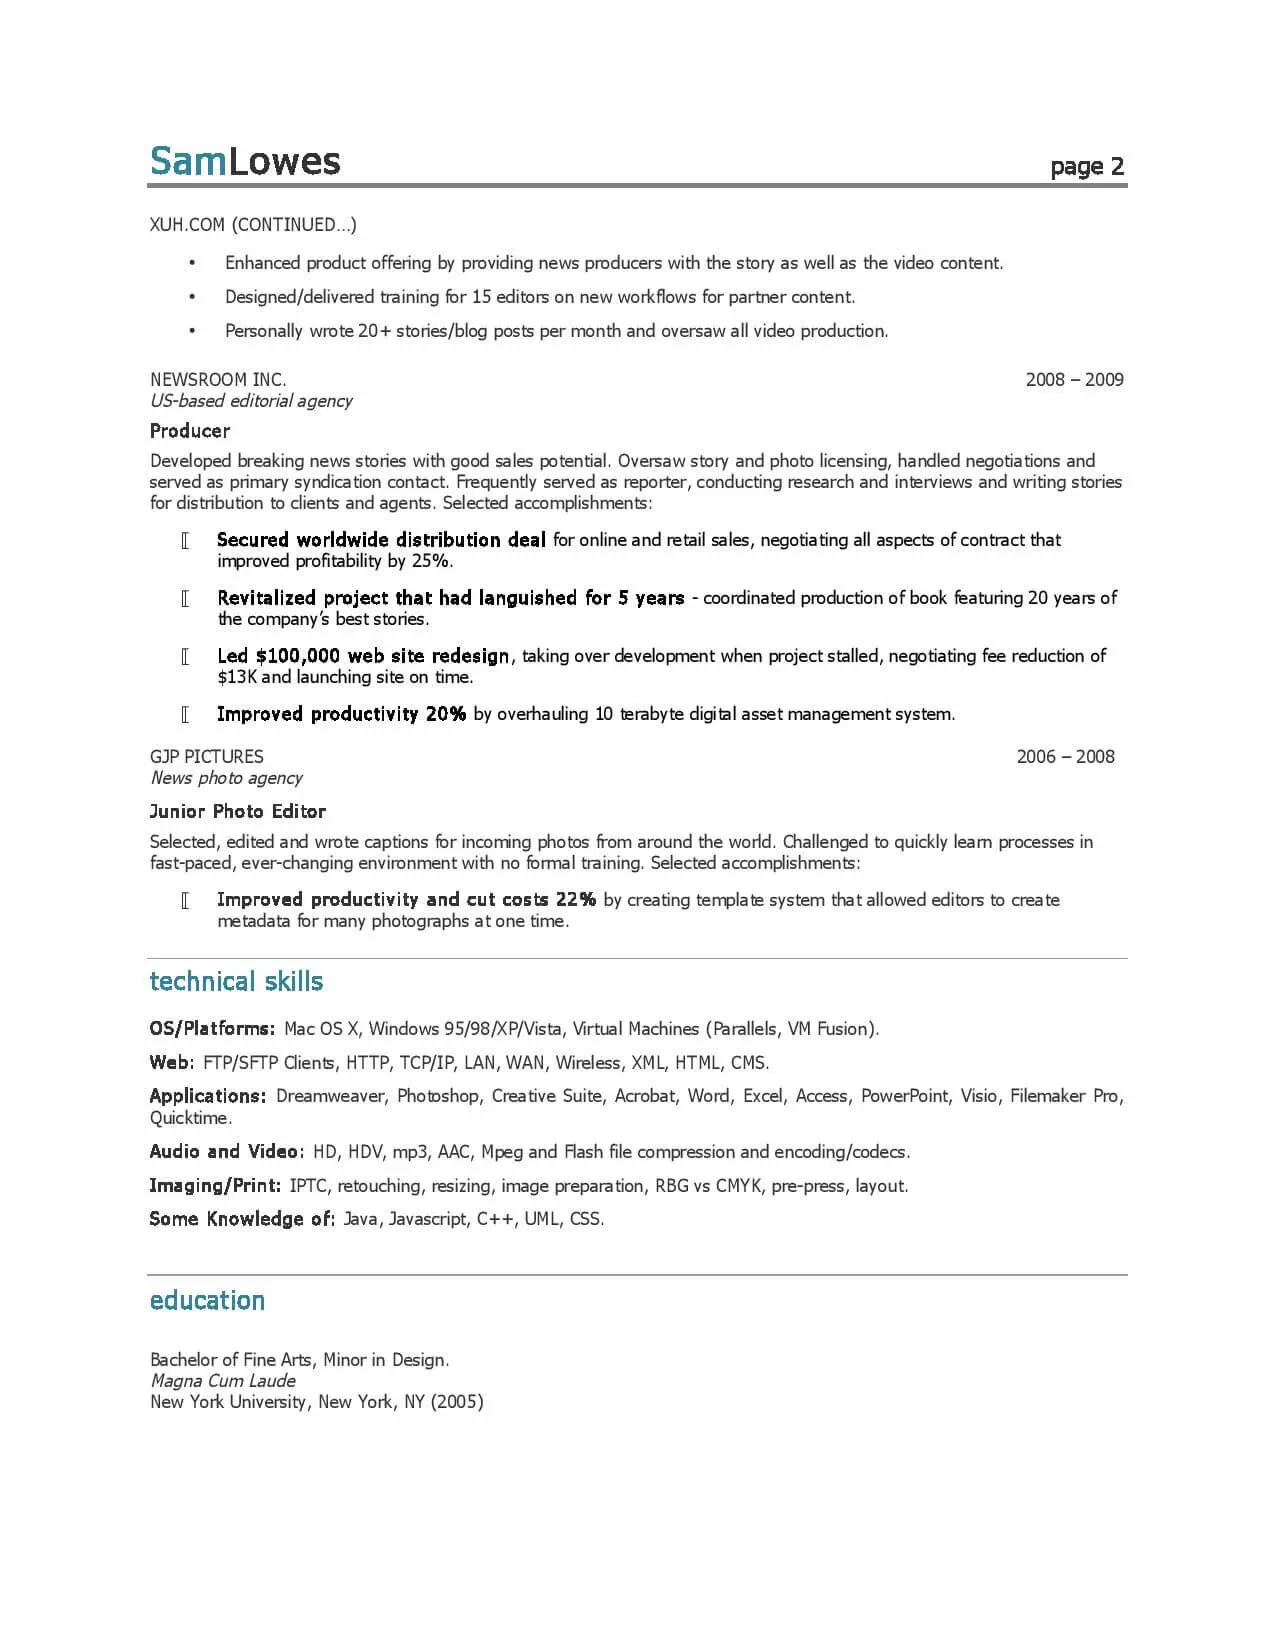 Content Production Specialist resume sample